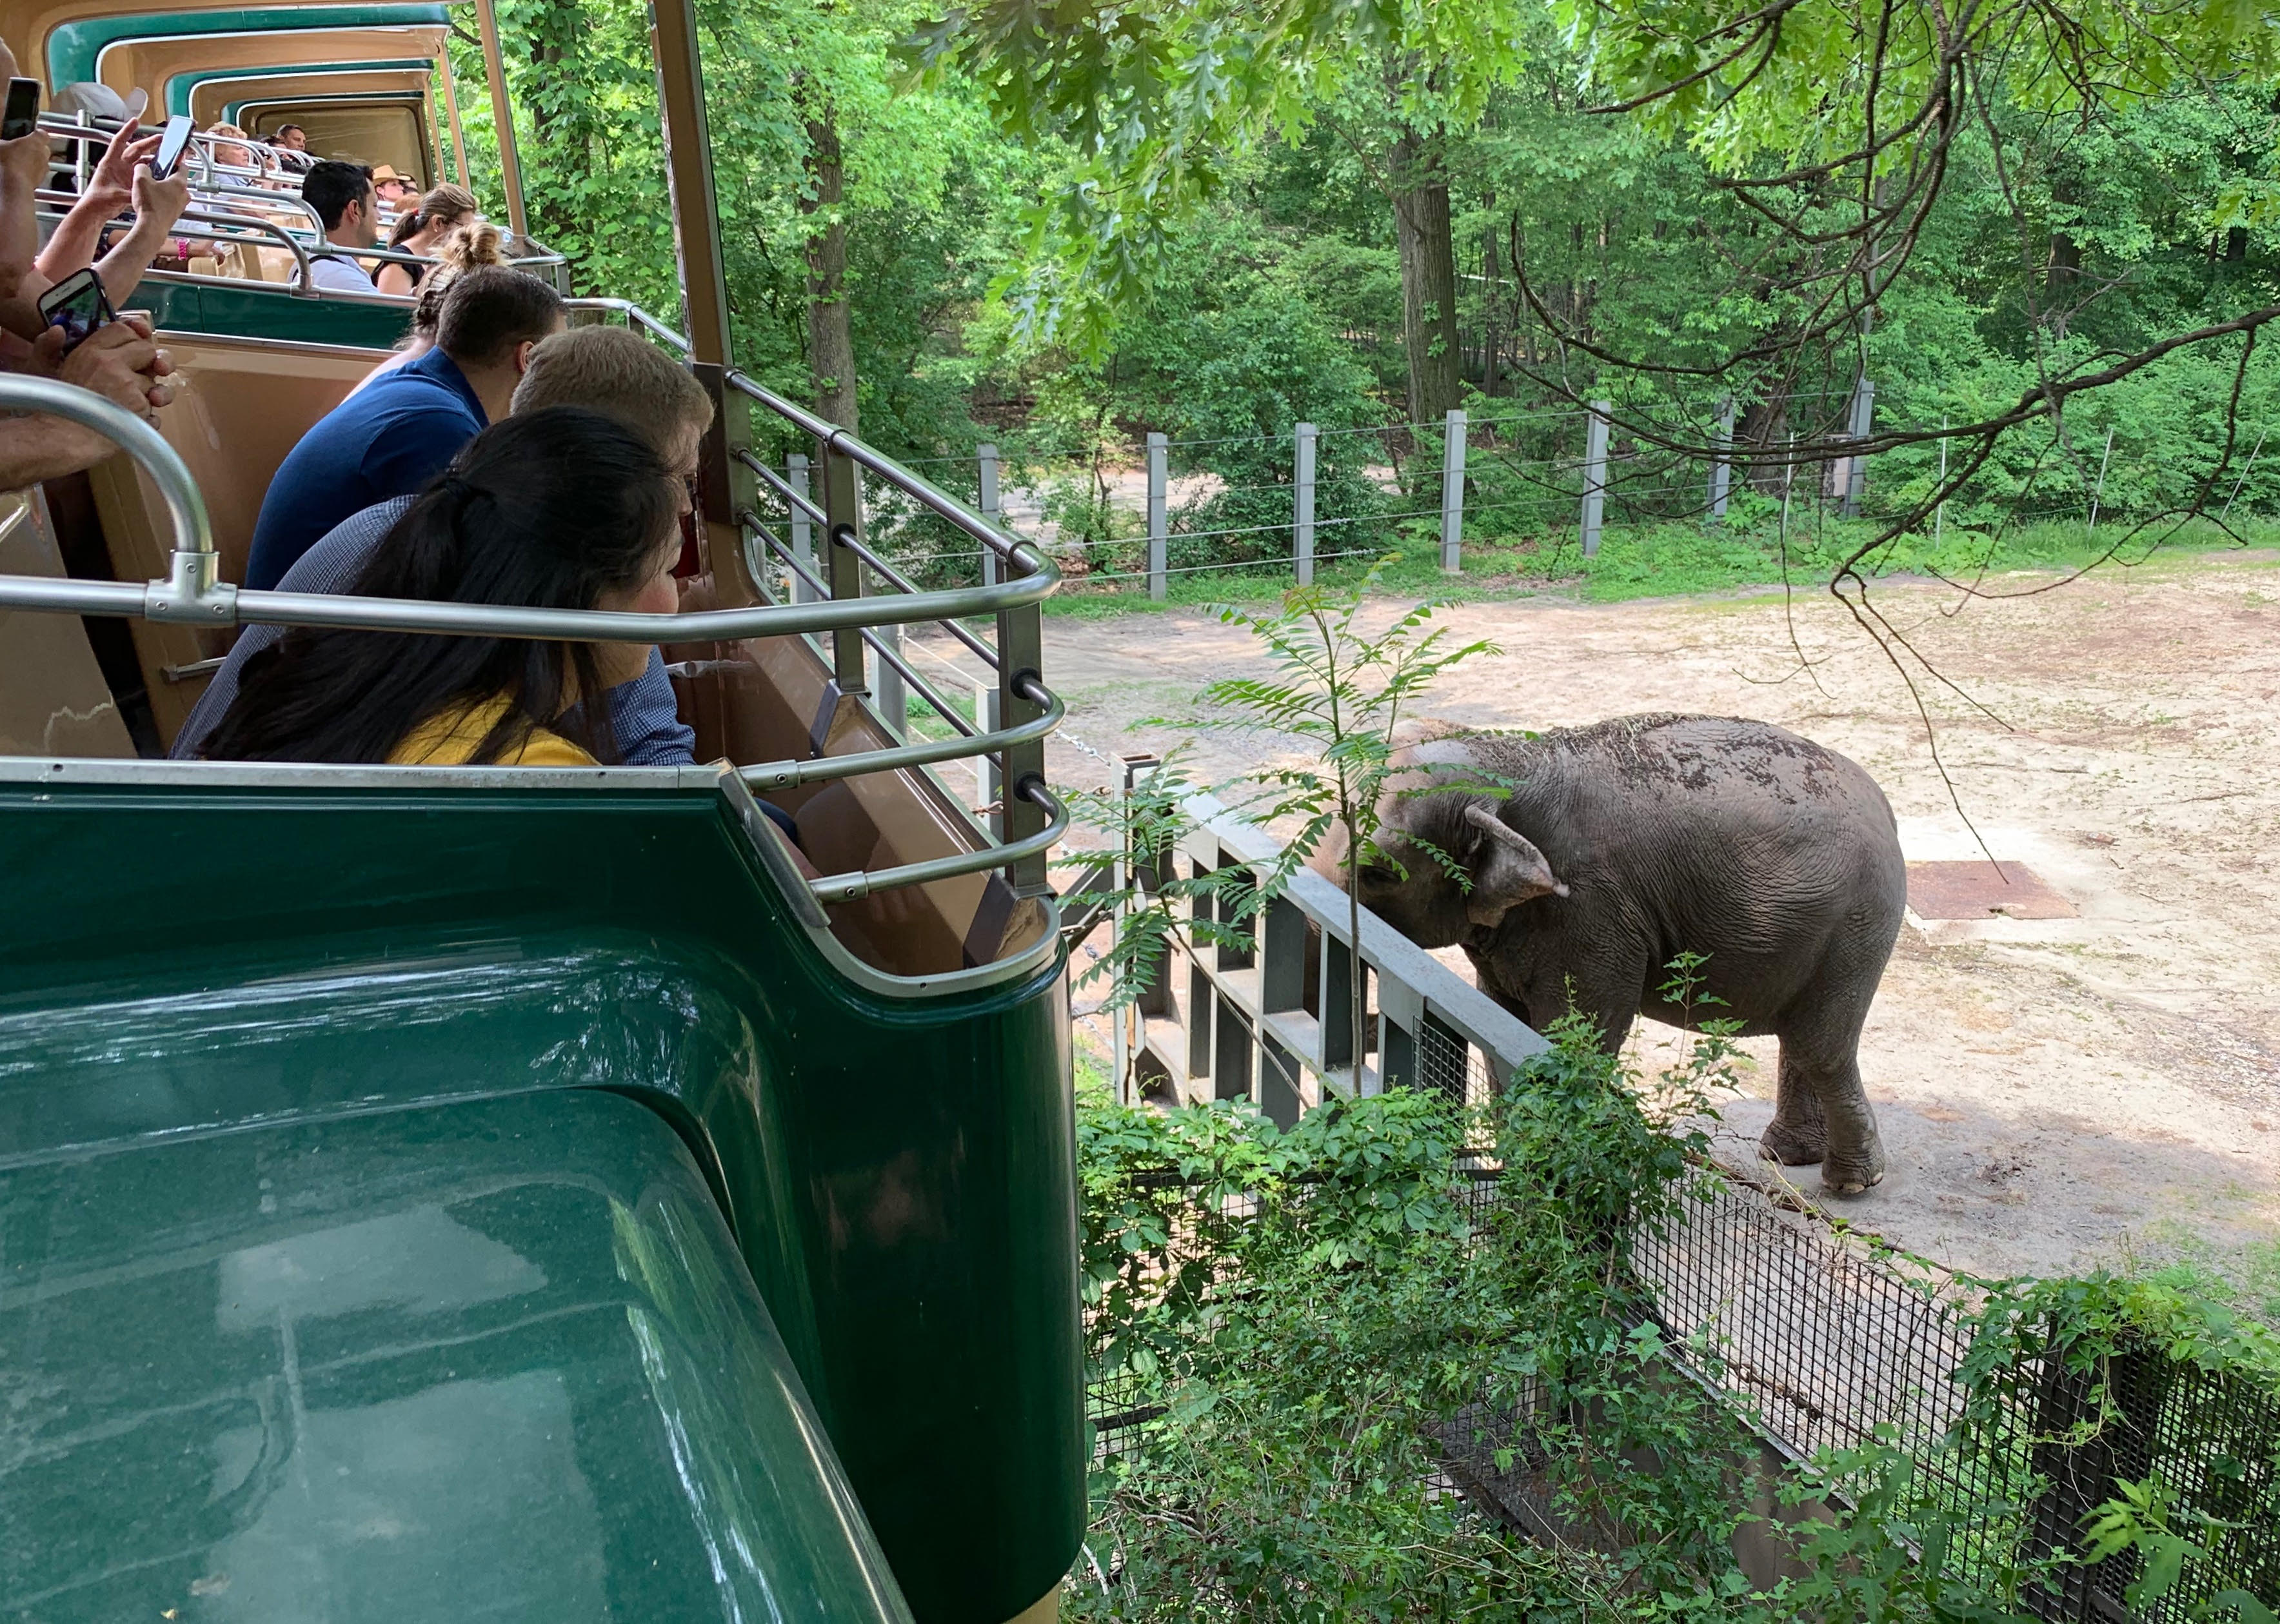 Visitors to the Bronx Zoo view Happy the elephant from monorail on Oct.27, 2019. (Courtesy Nonhuman Rights Project/Gigi Glendinning)